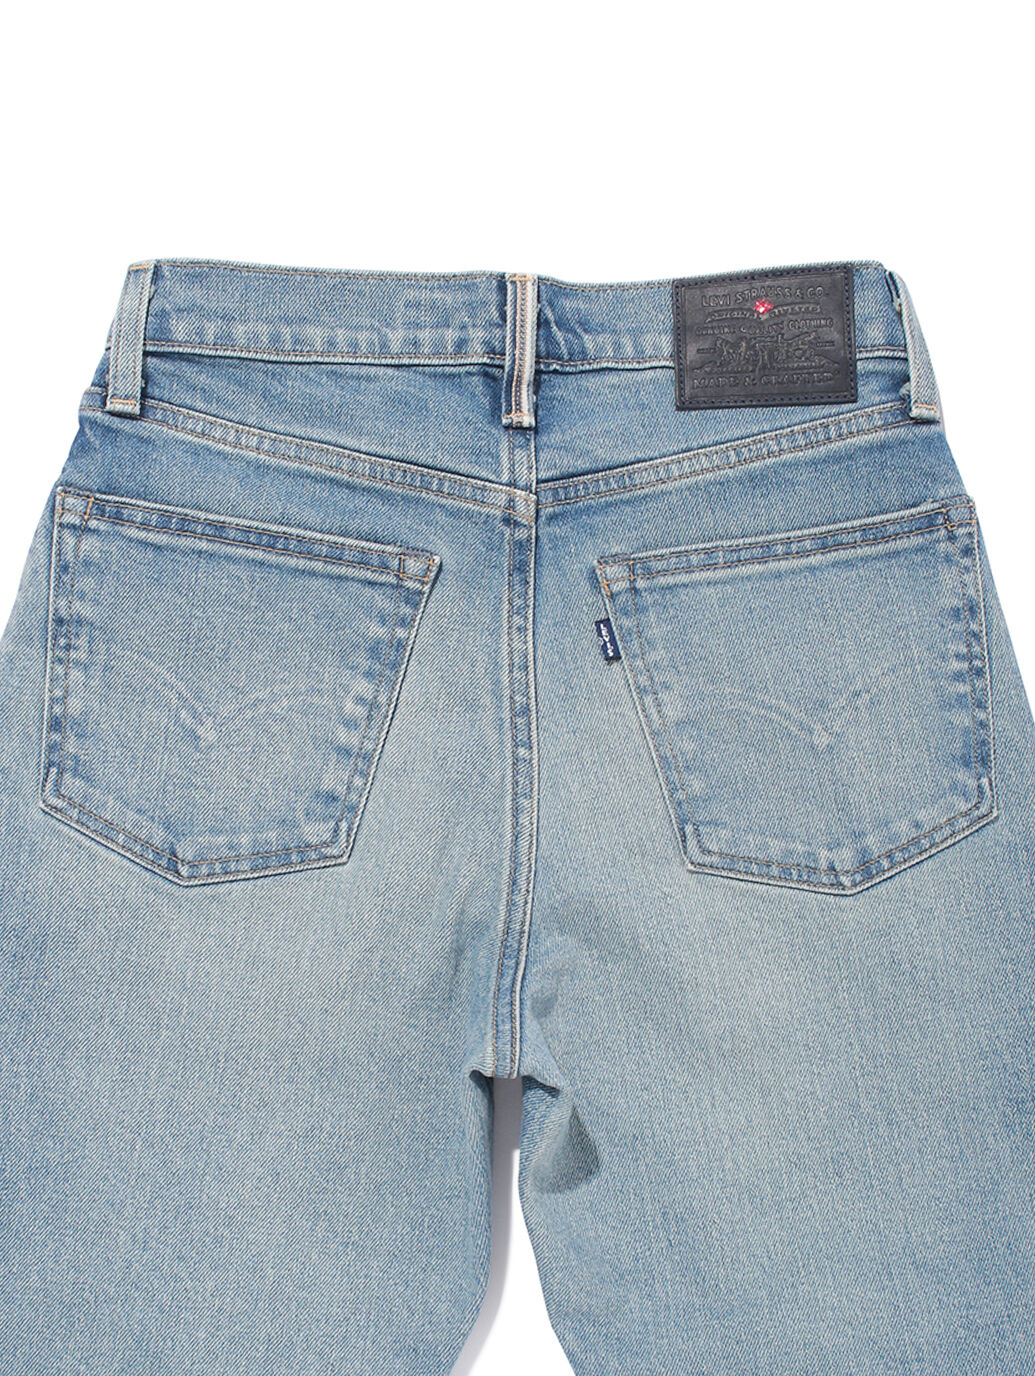 LEVI'S® MADE&CRAFTED®HIGH RISE BORROWED FROM THE BOYS HANSHA MADE 